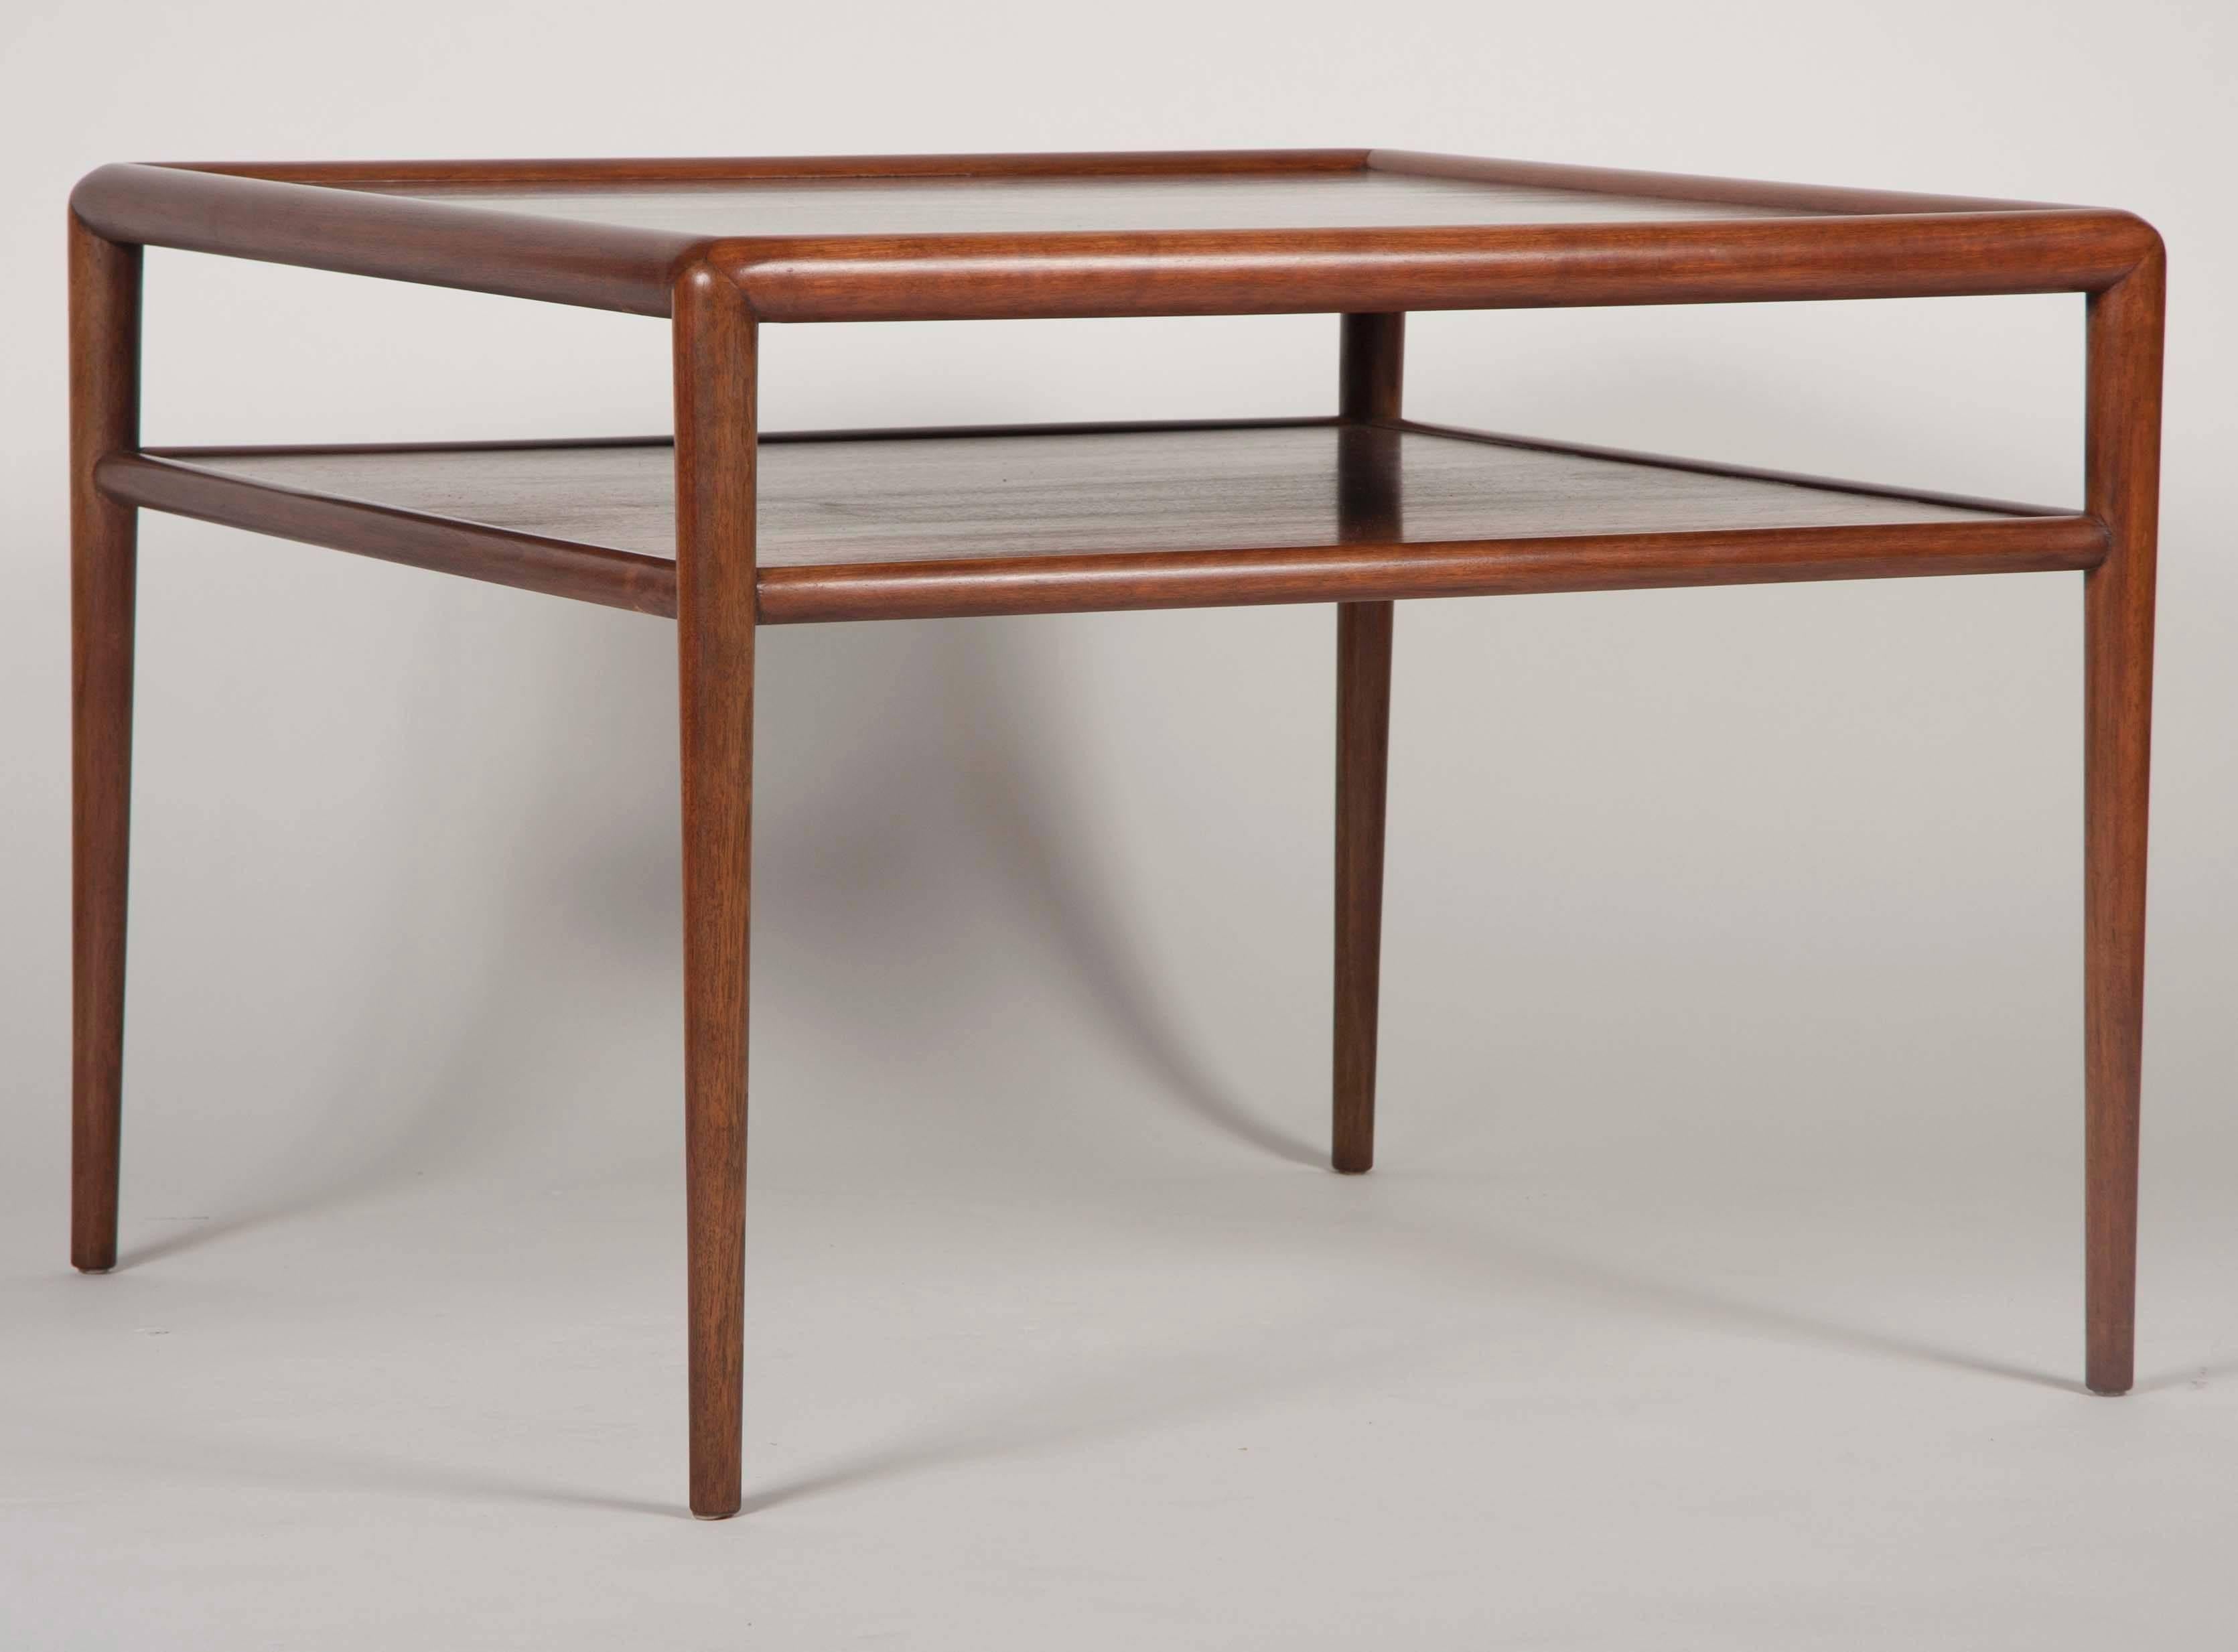 A two-tier T.H. Robsjohn-Gibbings walnut side table - coffee table. Fully restored and labeled Gibbings for Widdicomb.